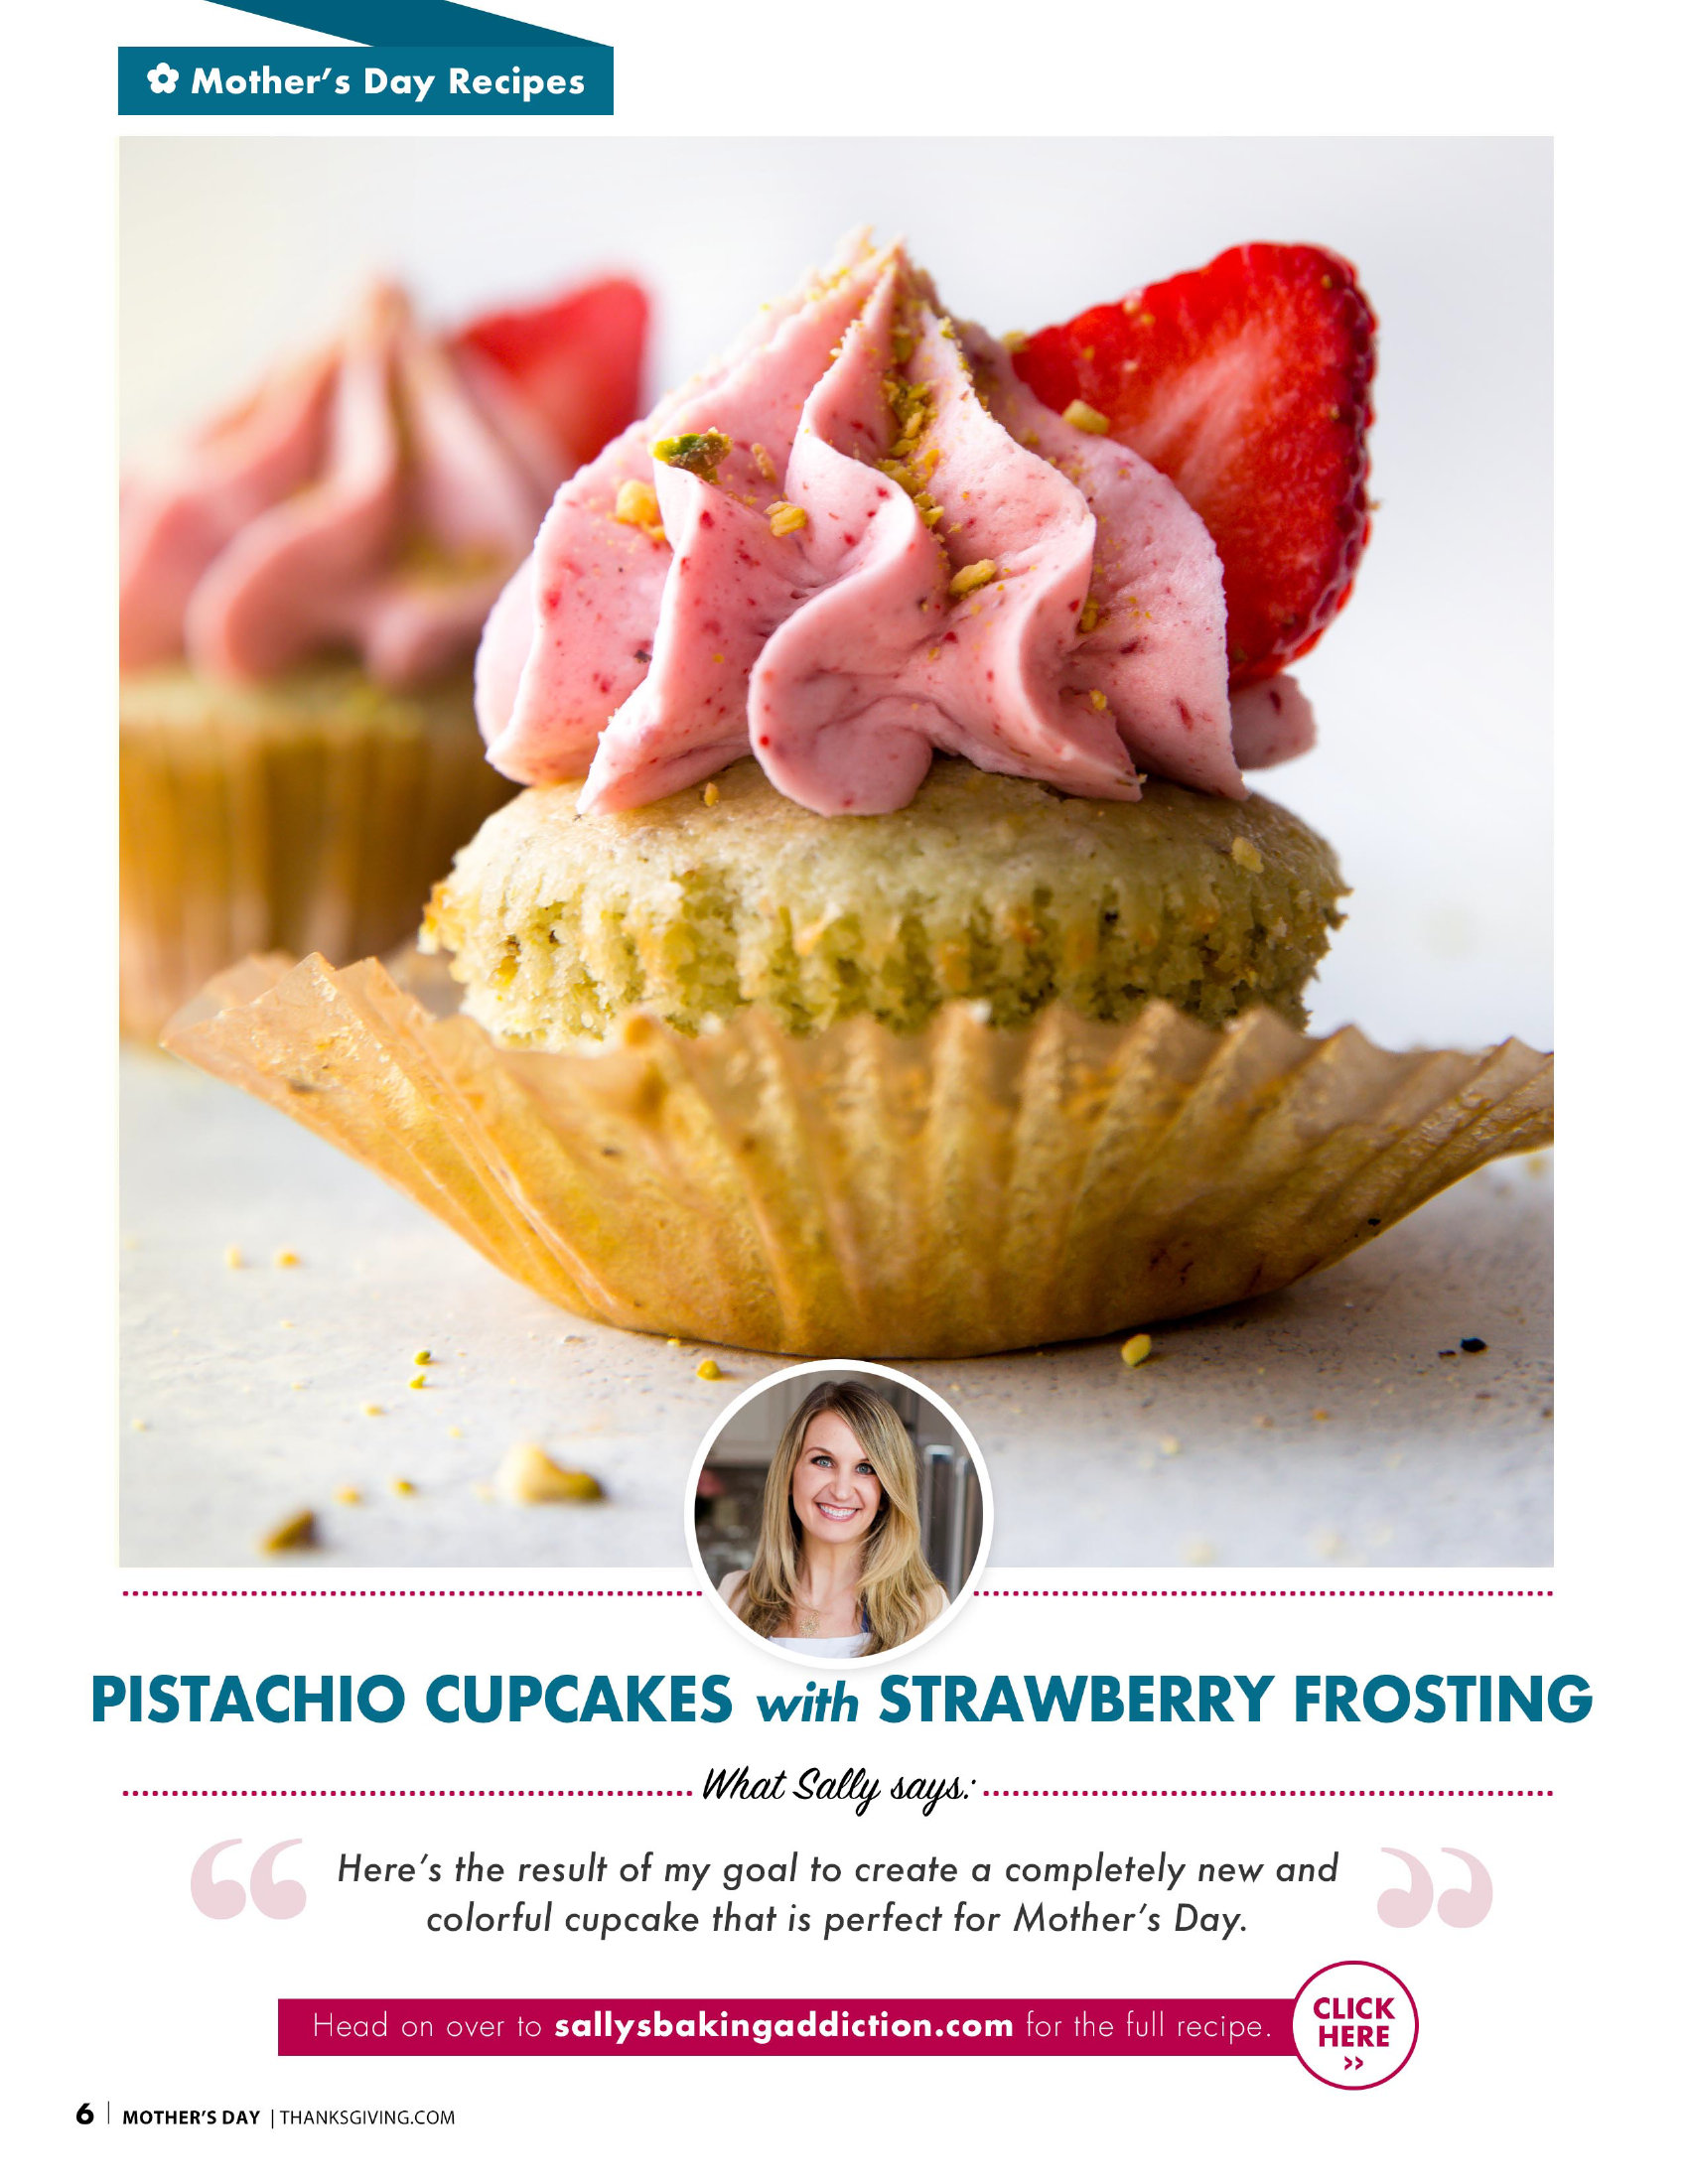 Pistachio cupcakes with strawberry frosting